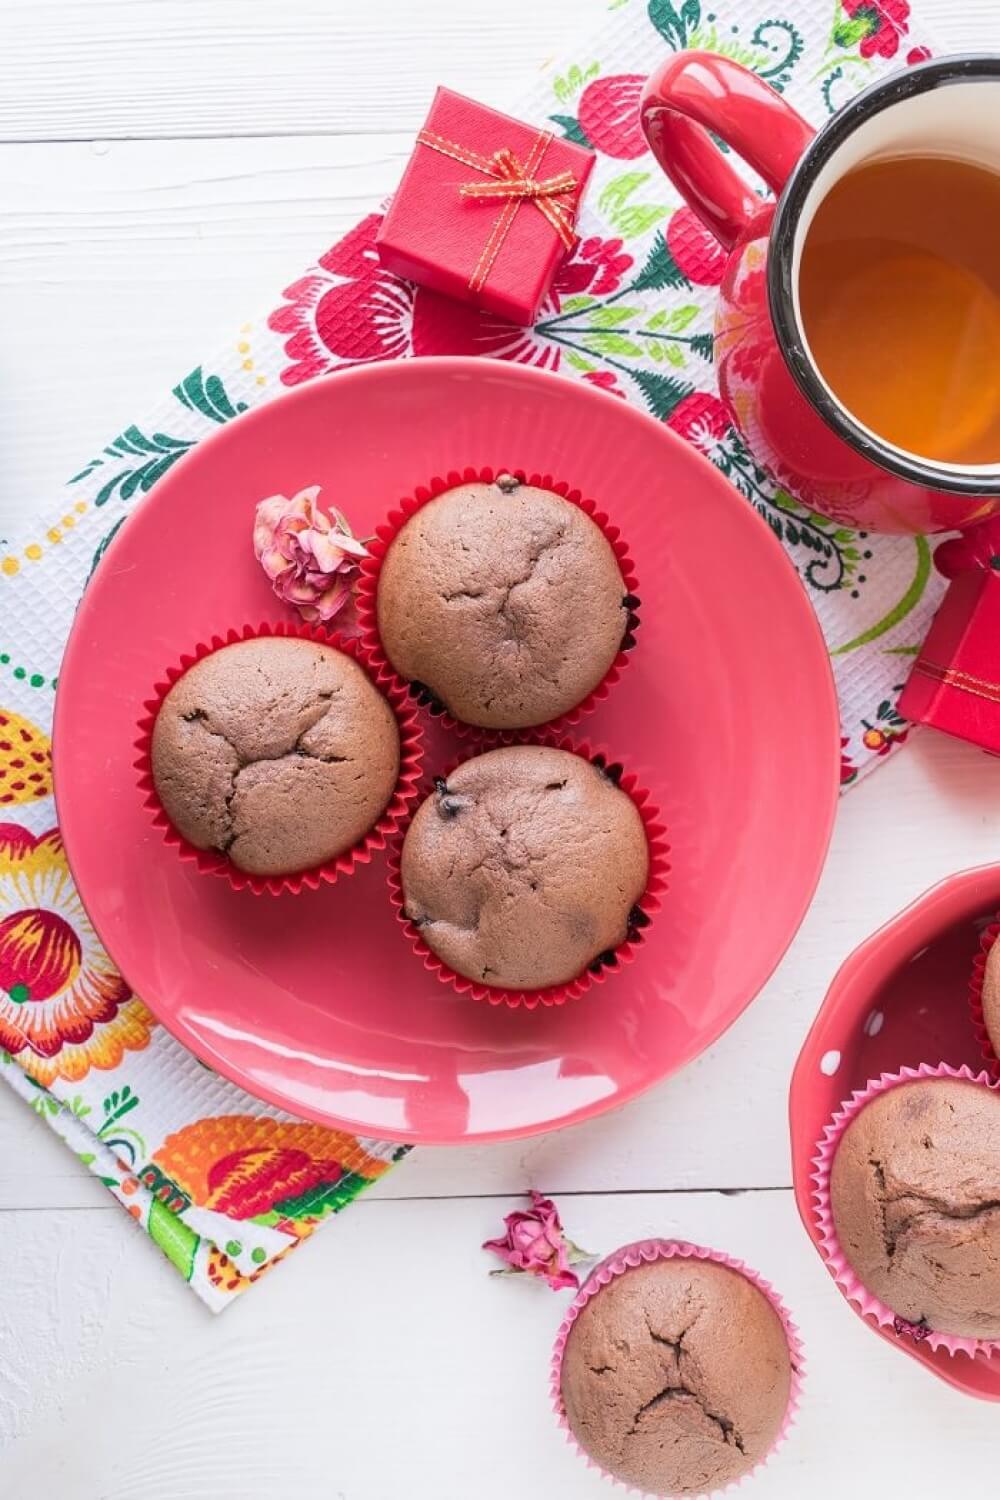 Blackcurrant Chocolate Muffins